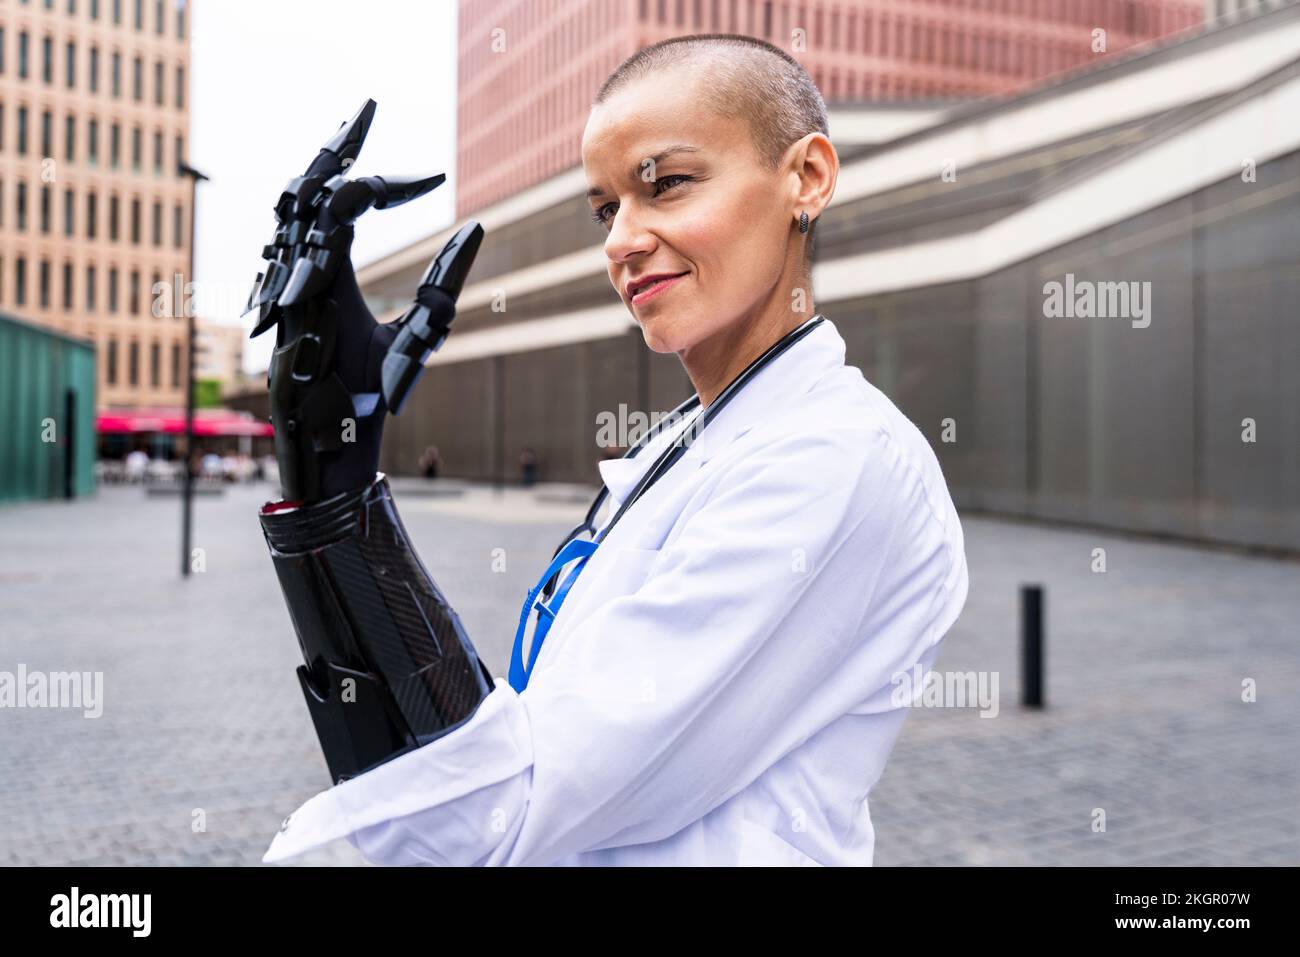 Smiling healthcare worker looking at prosthetic equipment Stock Photo